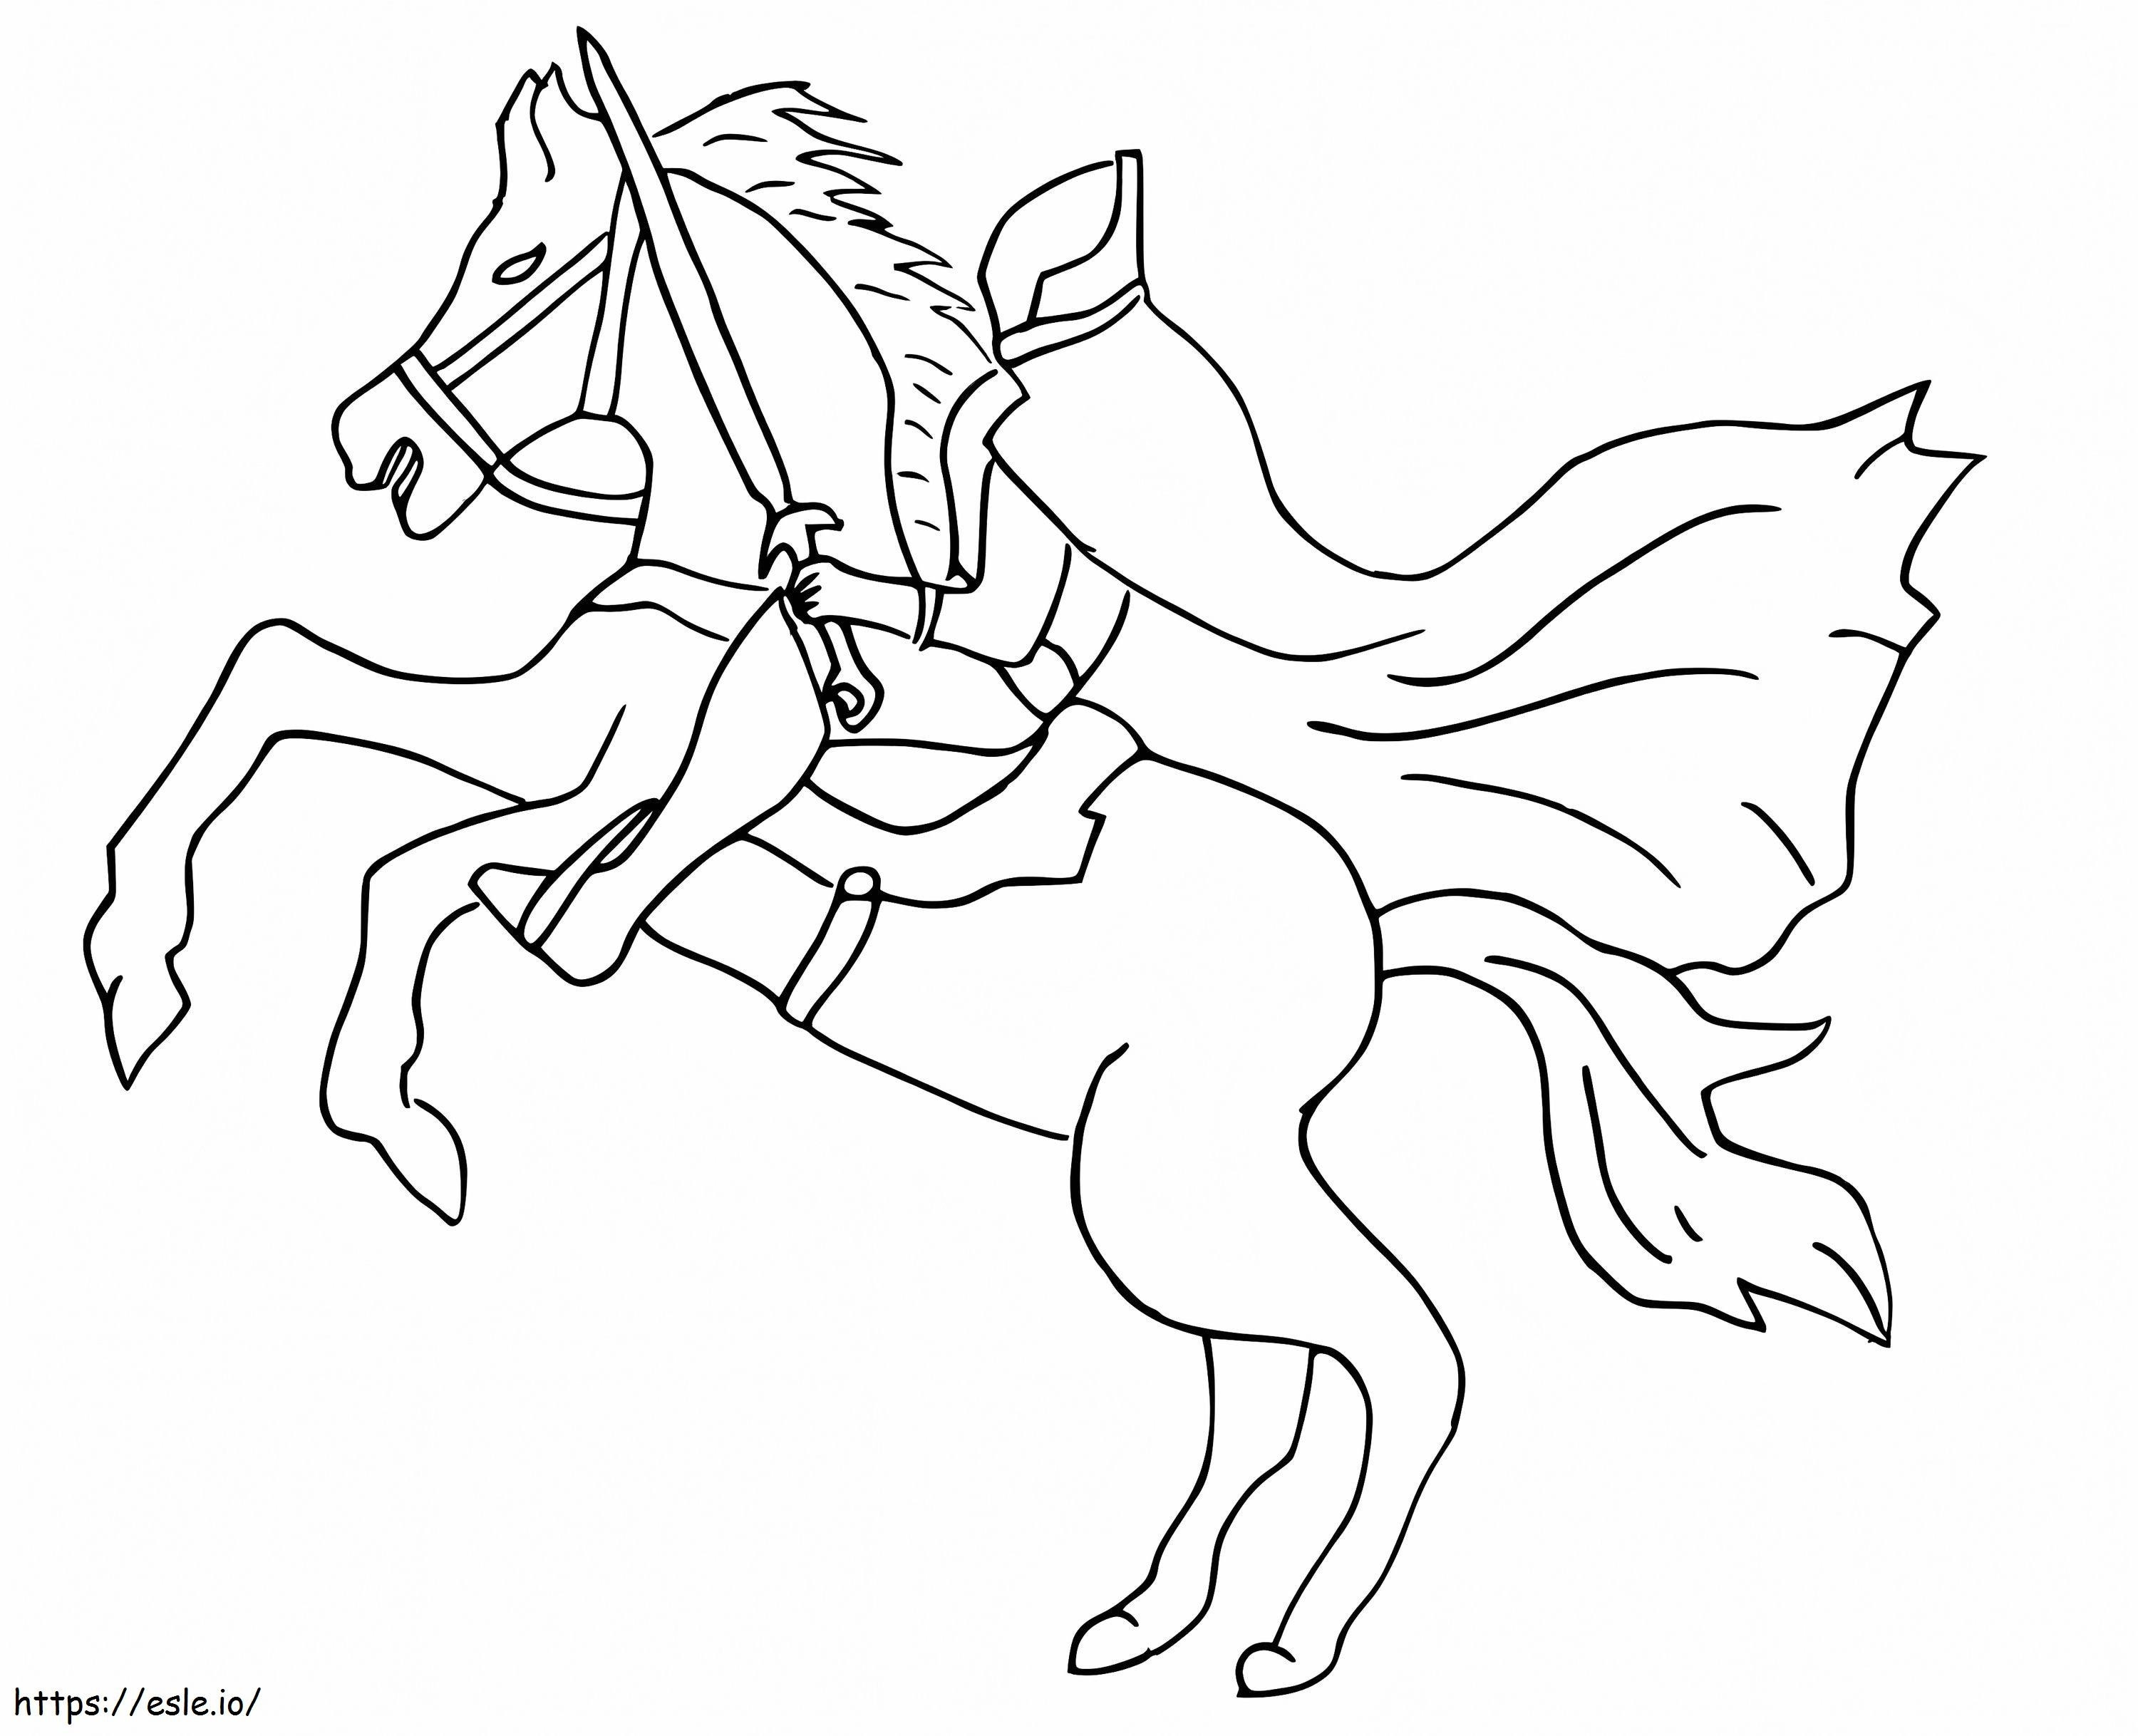 Headless Horseman With Sword coloring page